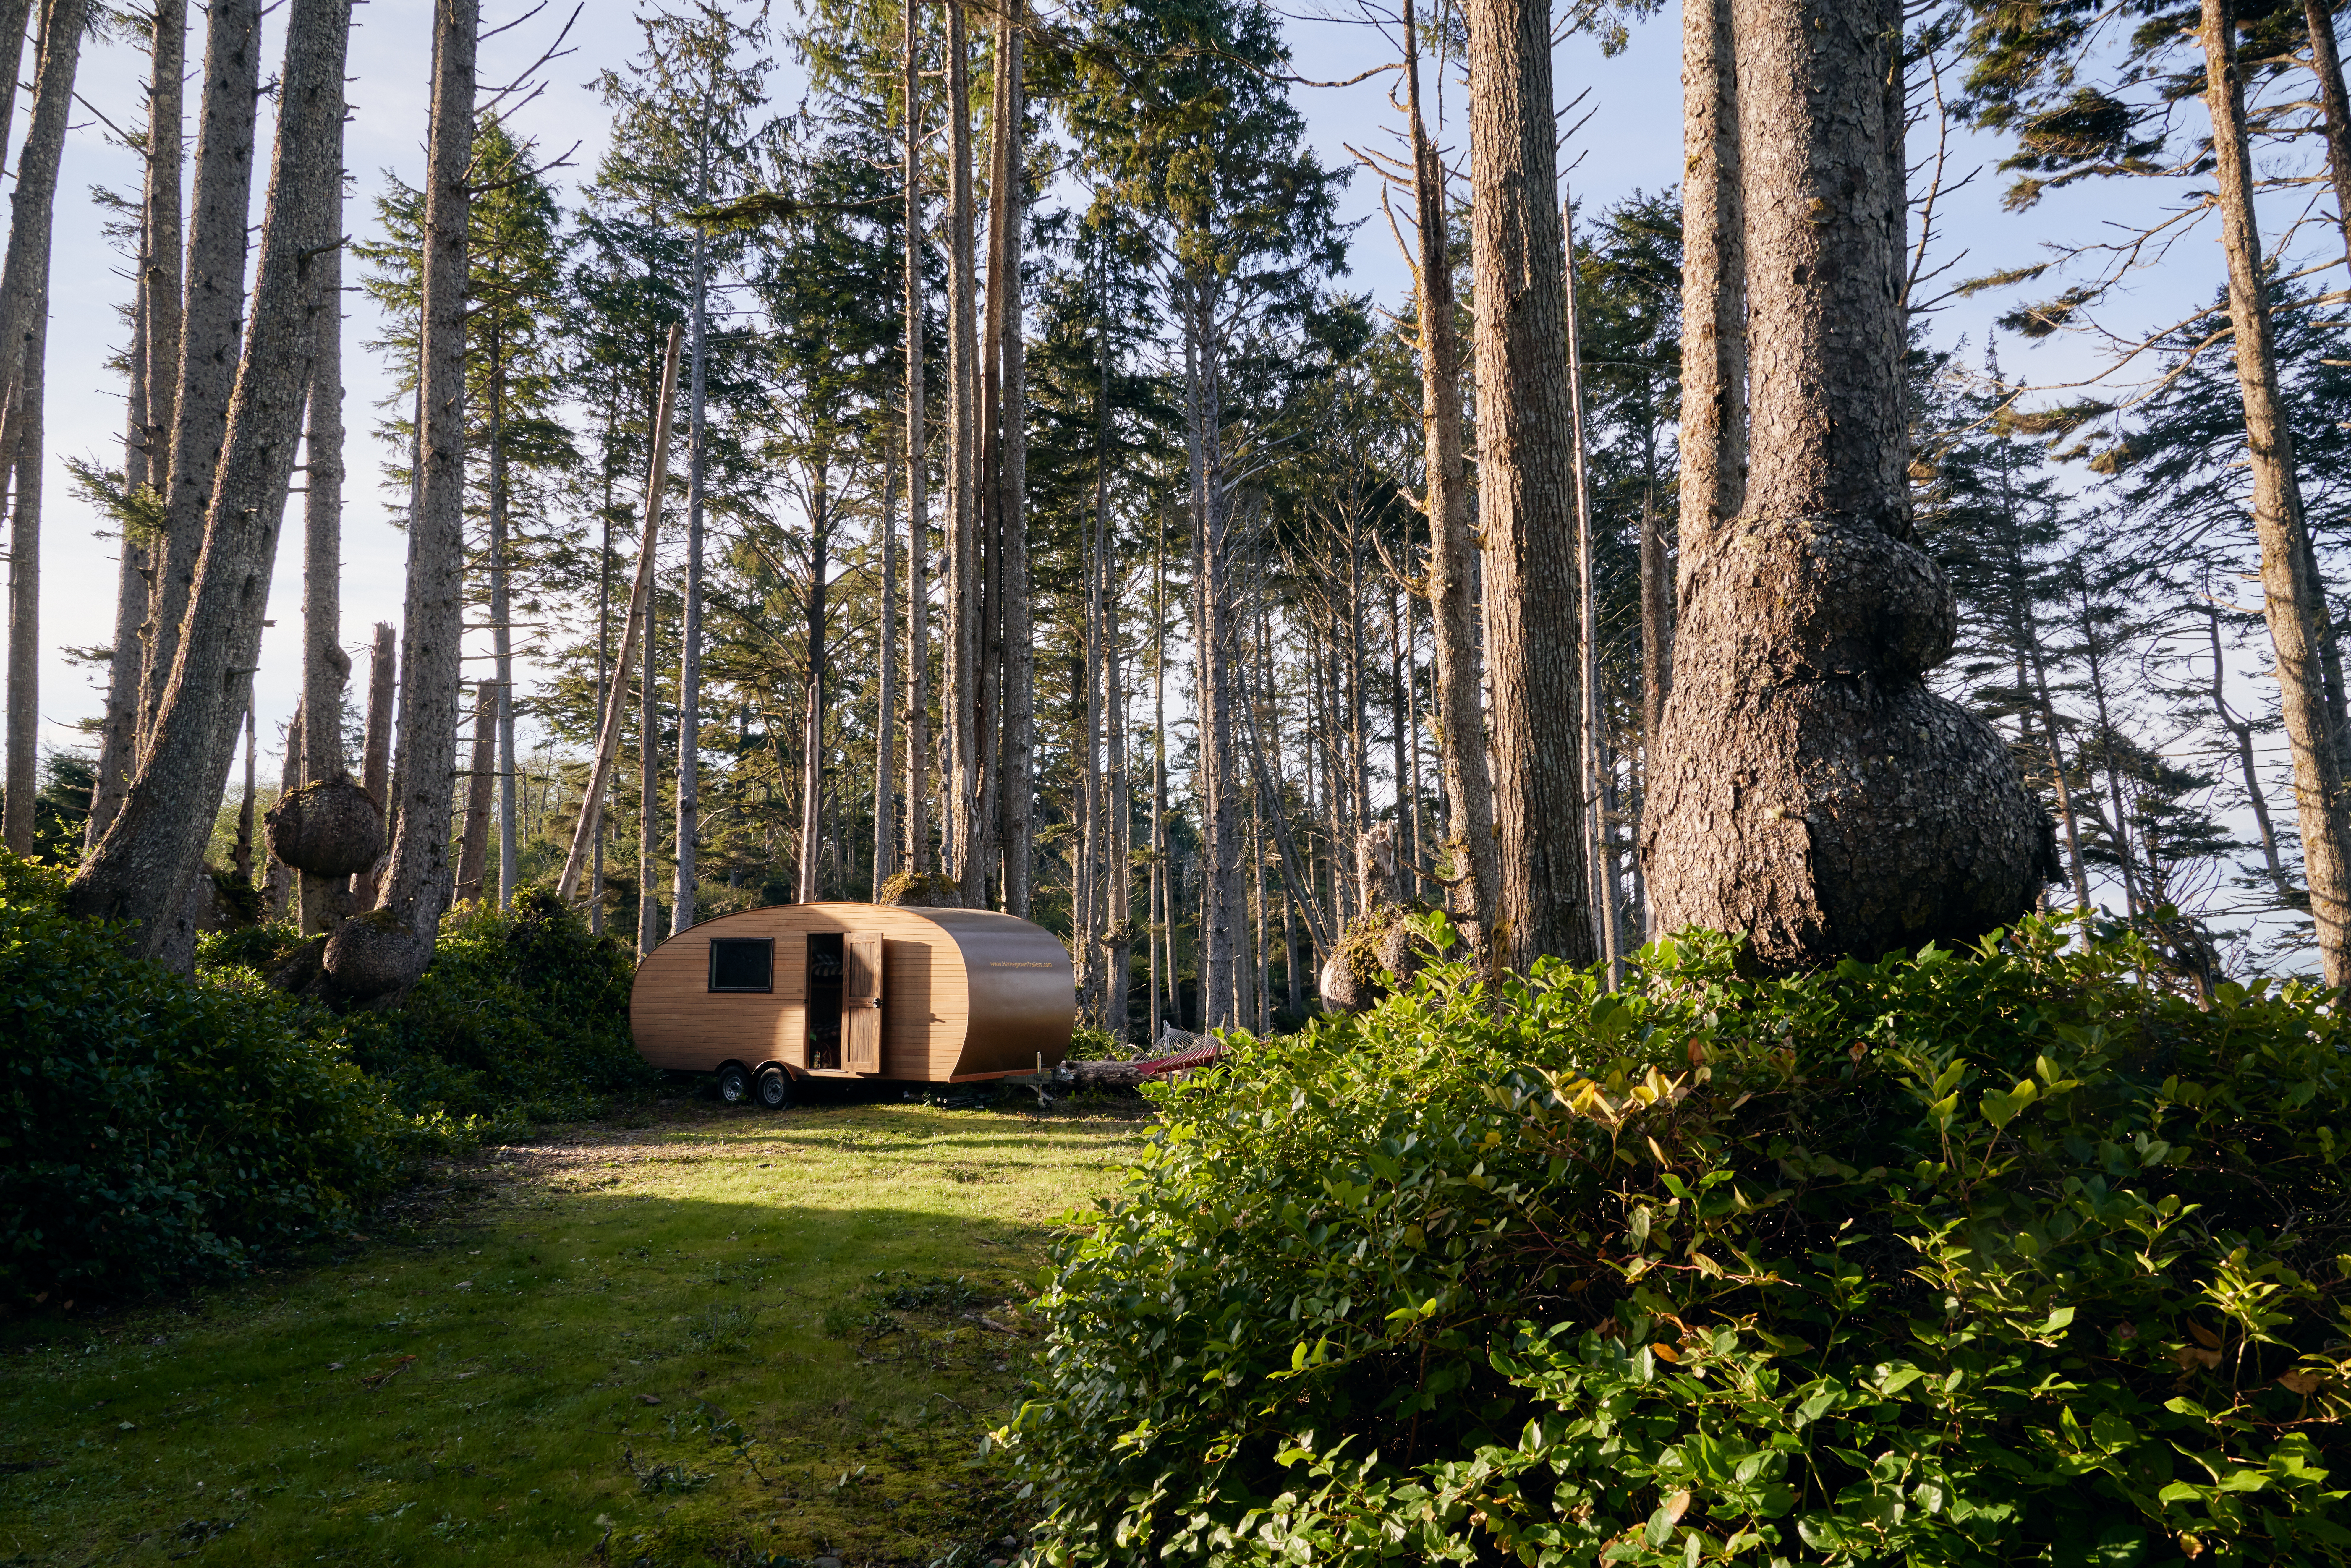 Shepherd's hut situated in the middle of a lush green forest with tall trees surrounding it.